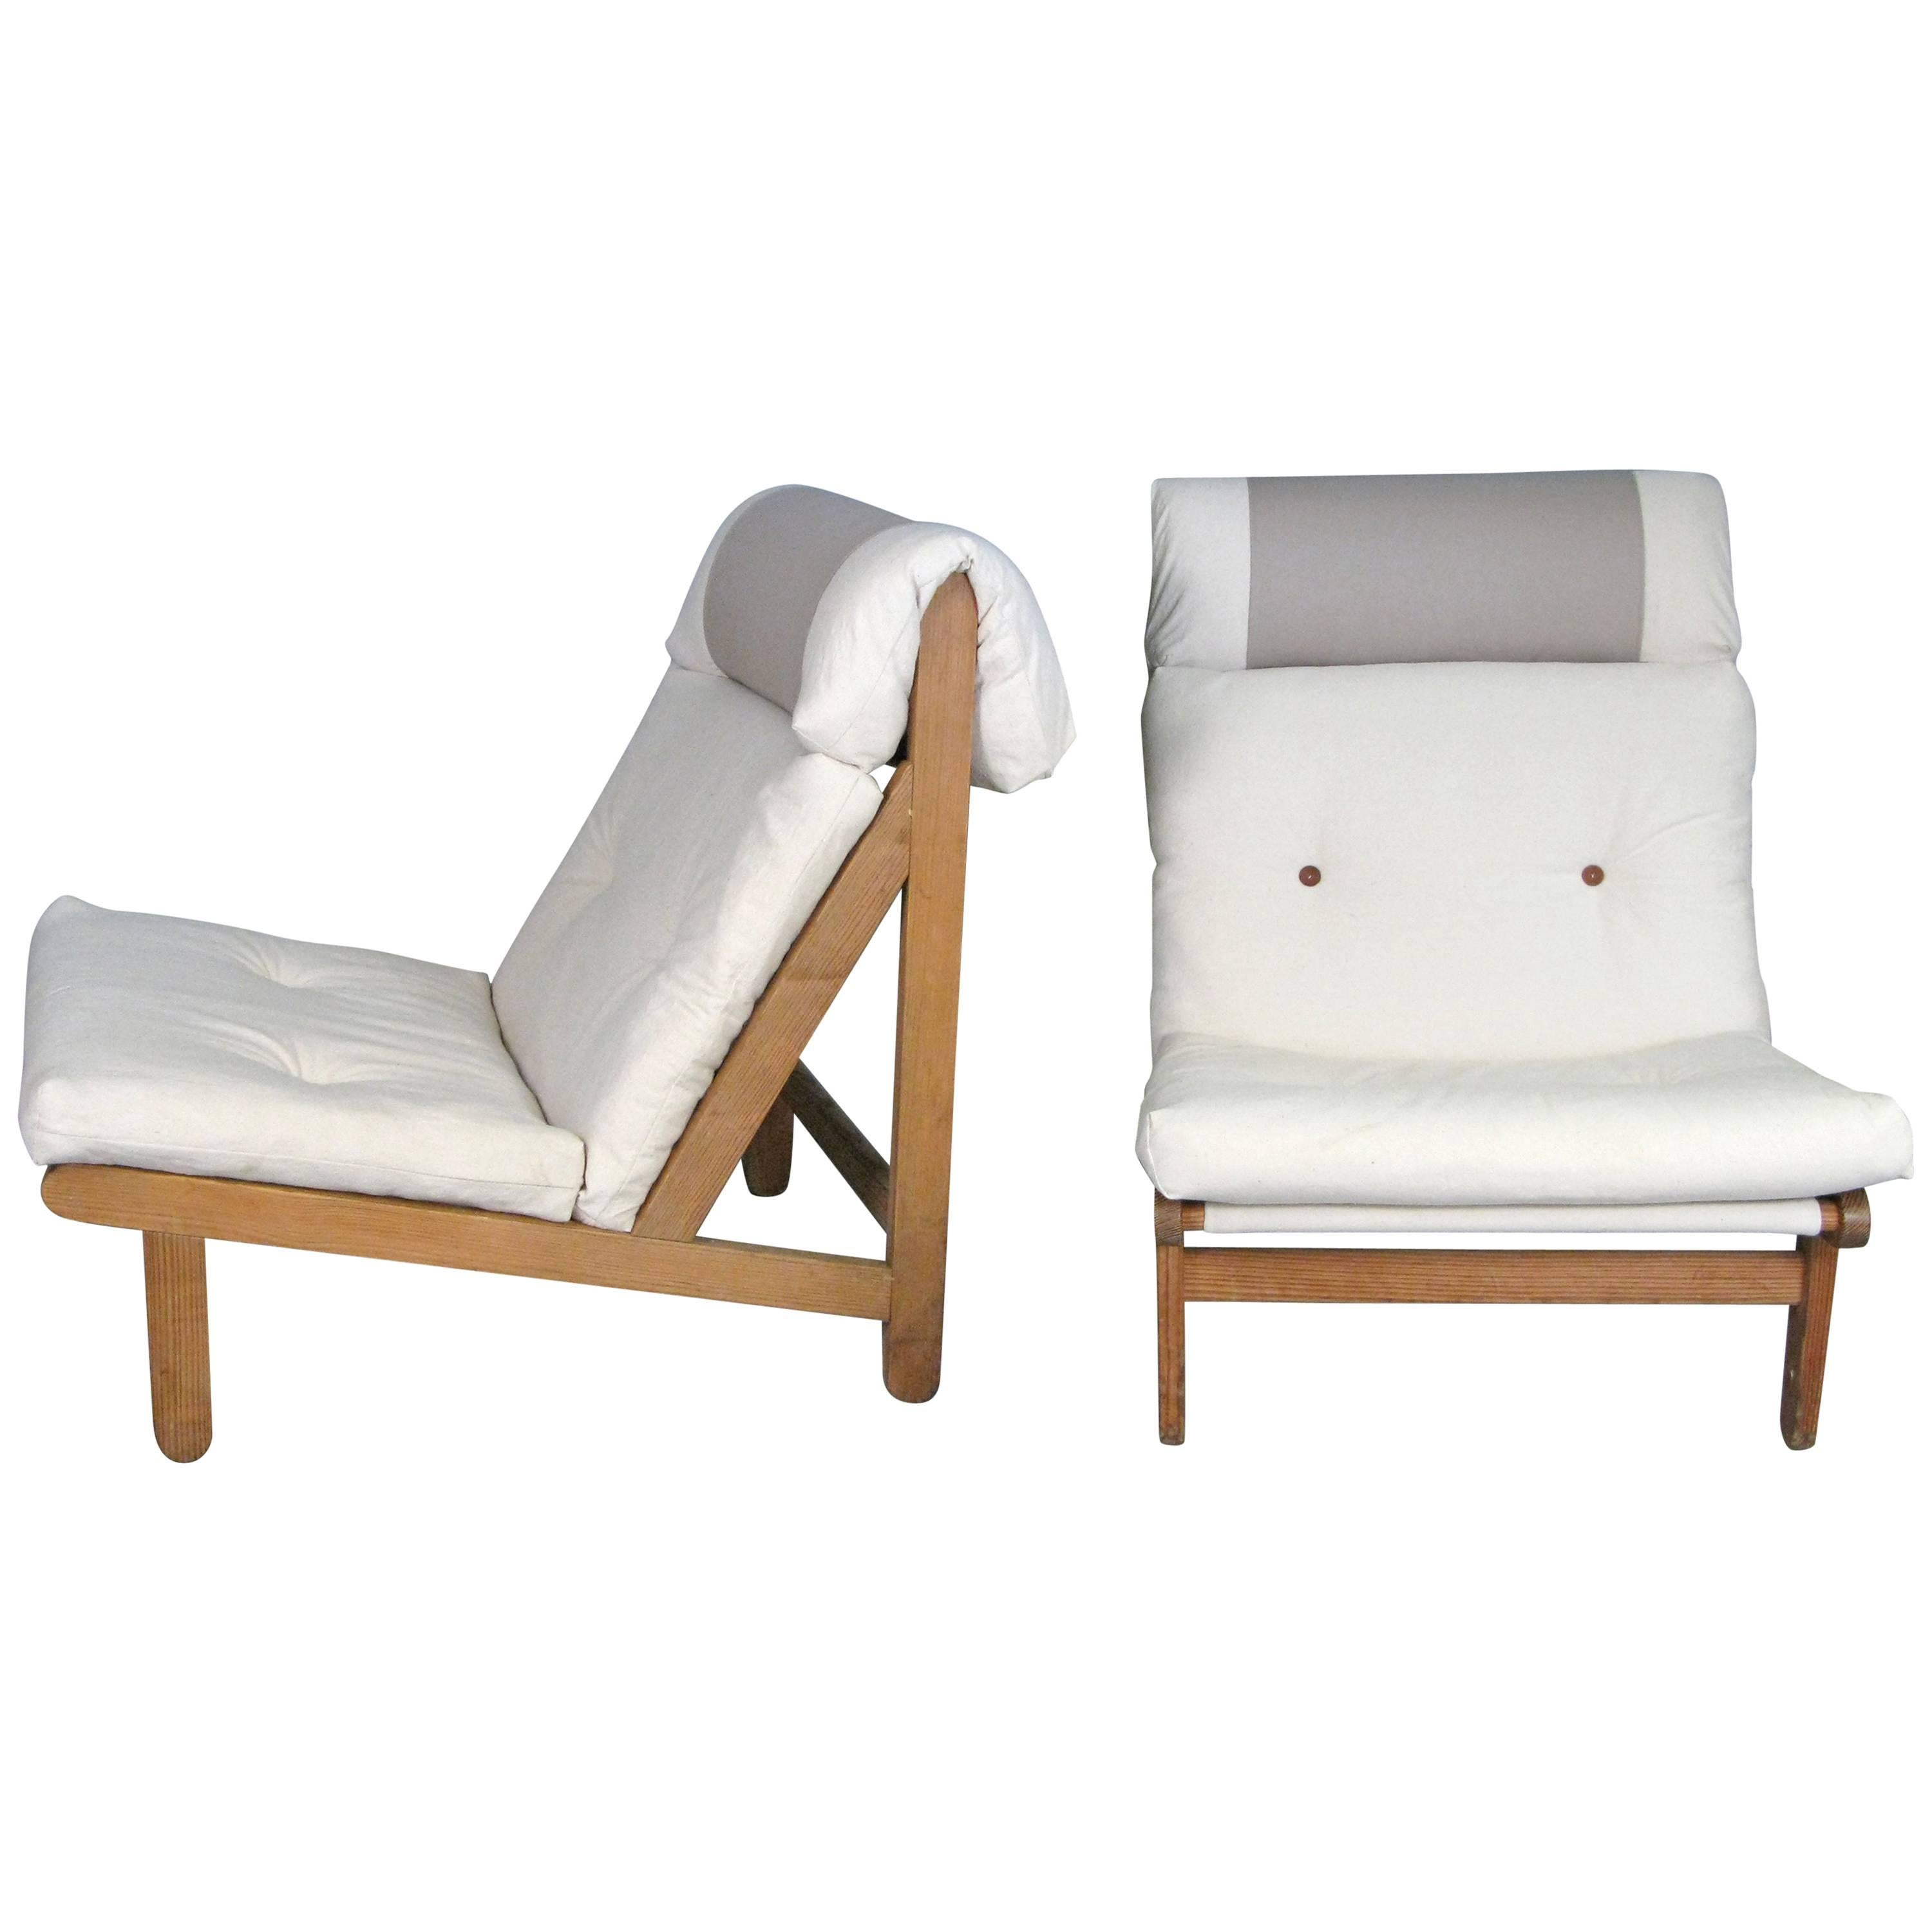 Pair of Danish 'a Frame' Lounge Chairs by Bernt Petersen